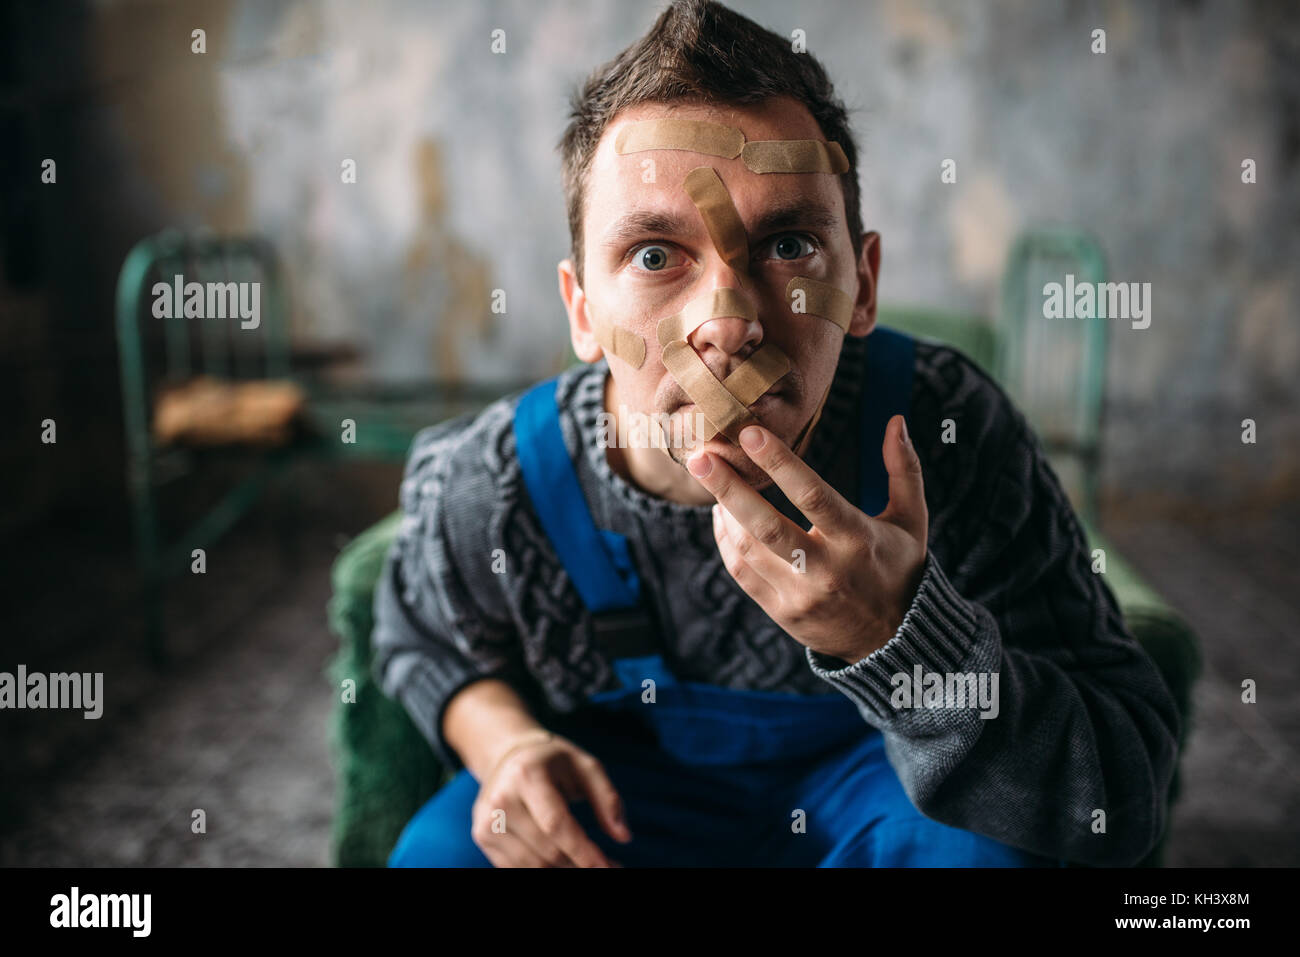 Madman, mouth sealed with plaster, violent patient Stock Photo